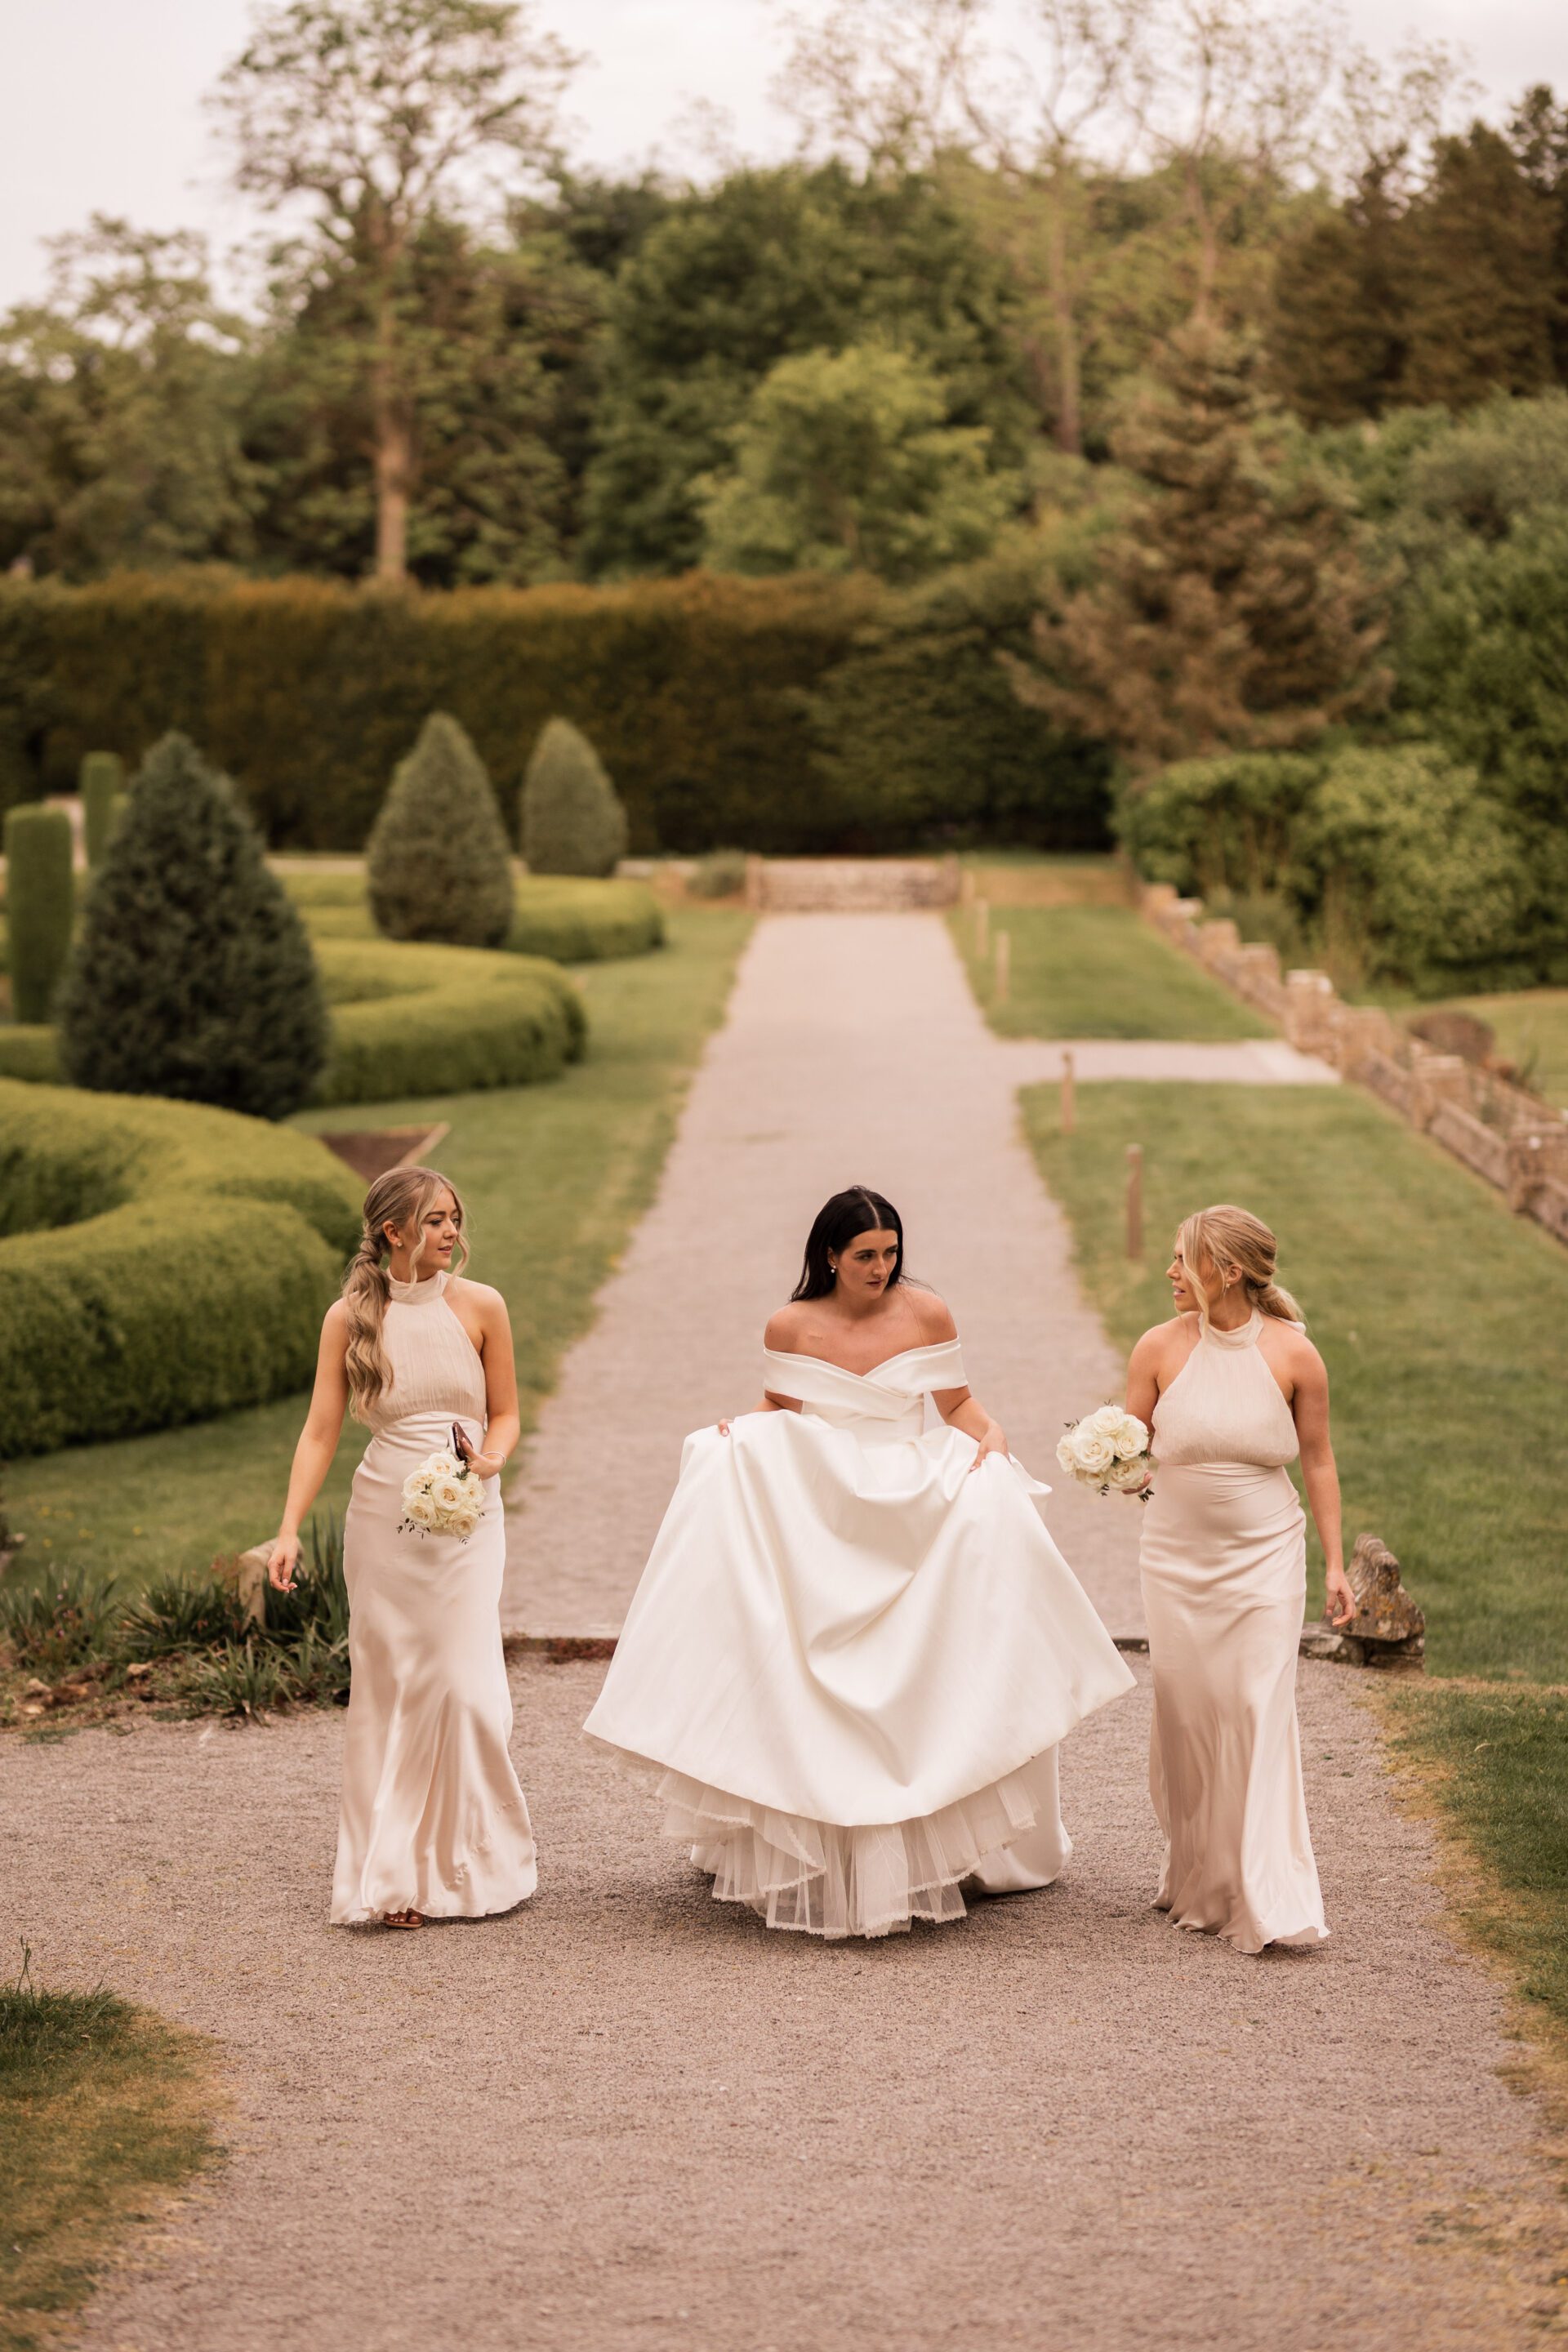 The bride walks with her bridesmaids at Tortworth Court